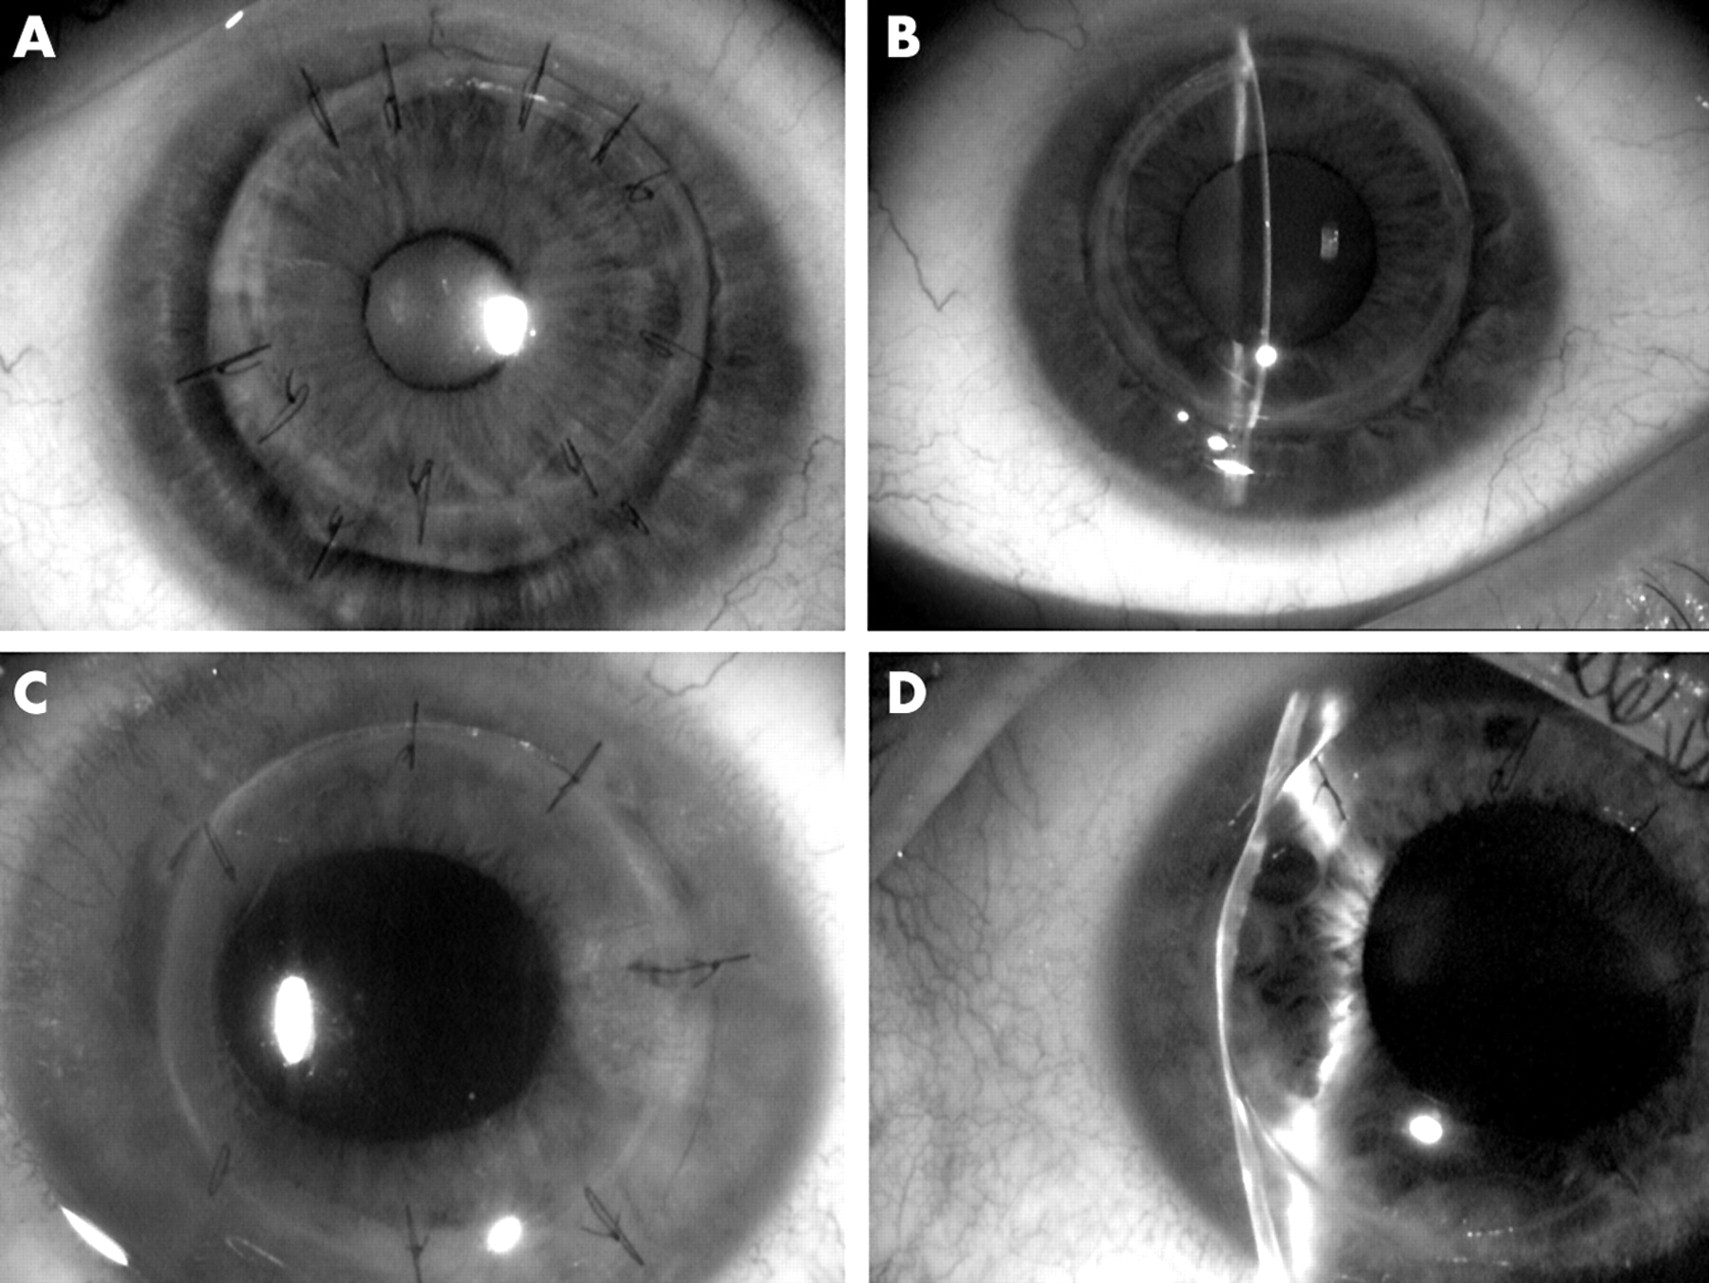 Relationship between Preoperative Corneal Thickness and Postoperative Visual Outcomes after Posterior Lamellar Corneal Transplant